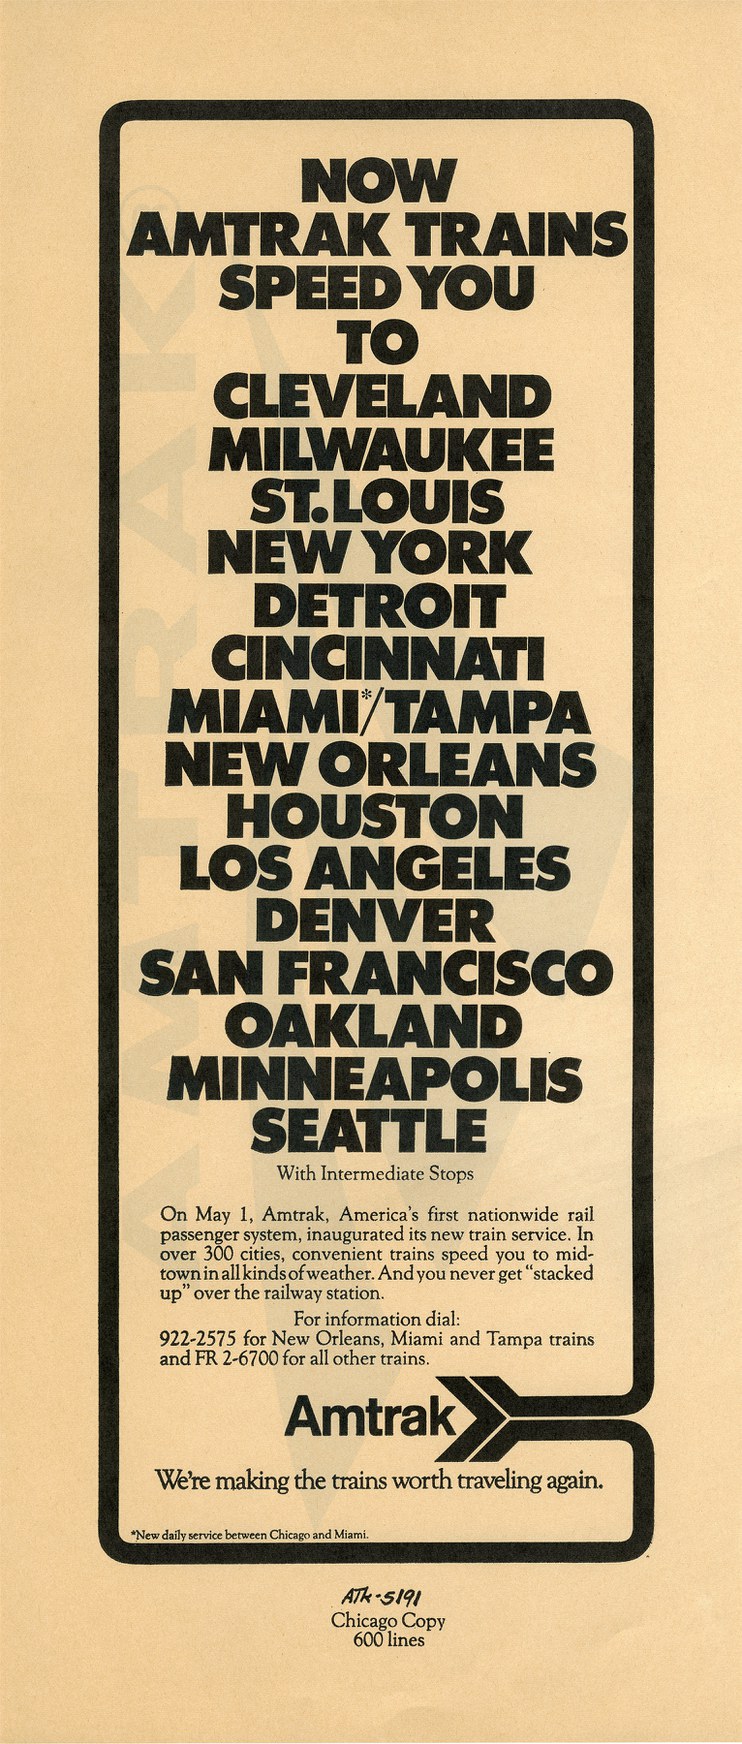 "Now Amtrak Trains Speed You To..." advertisement, 1971.